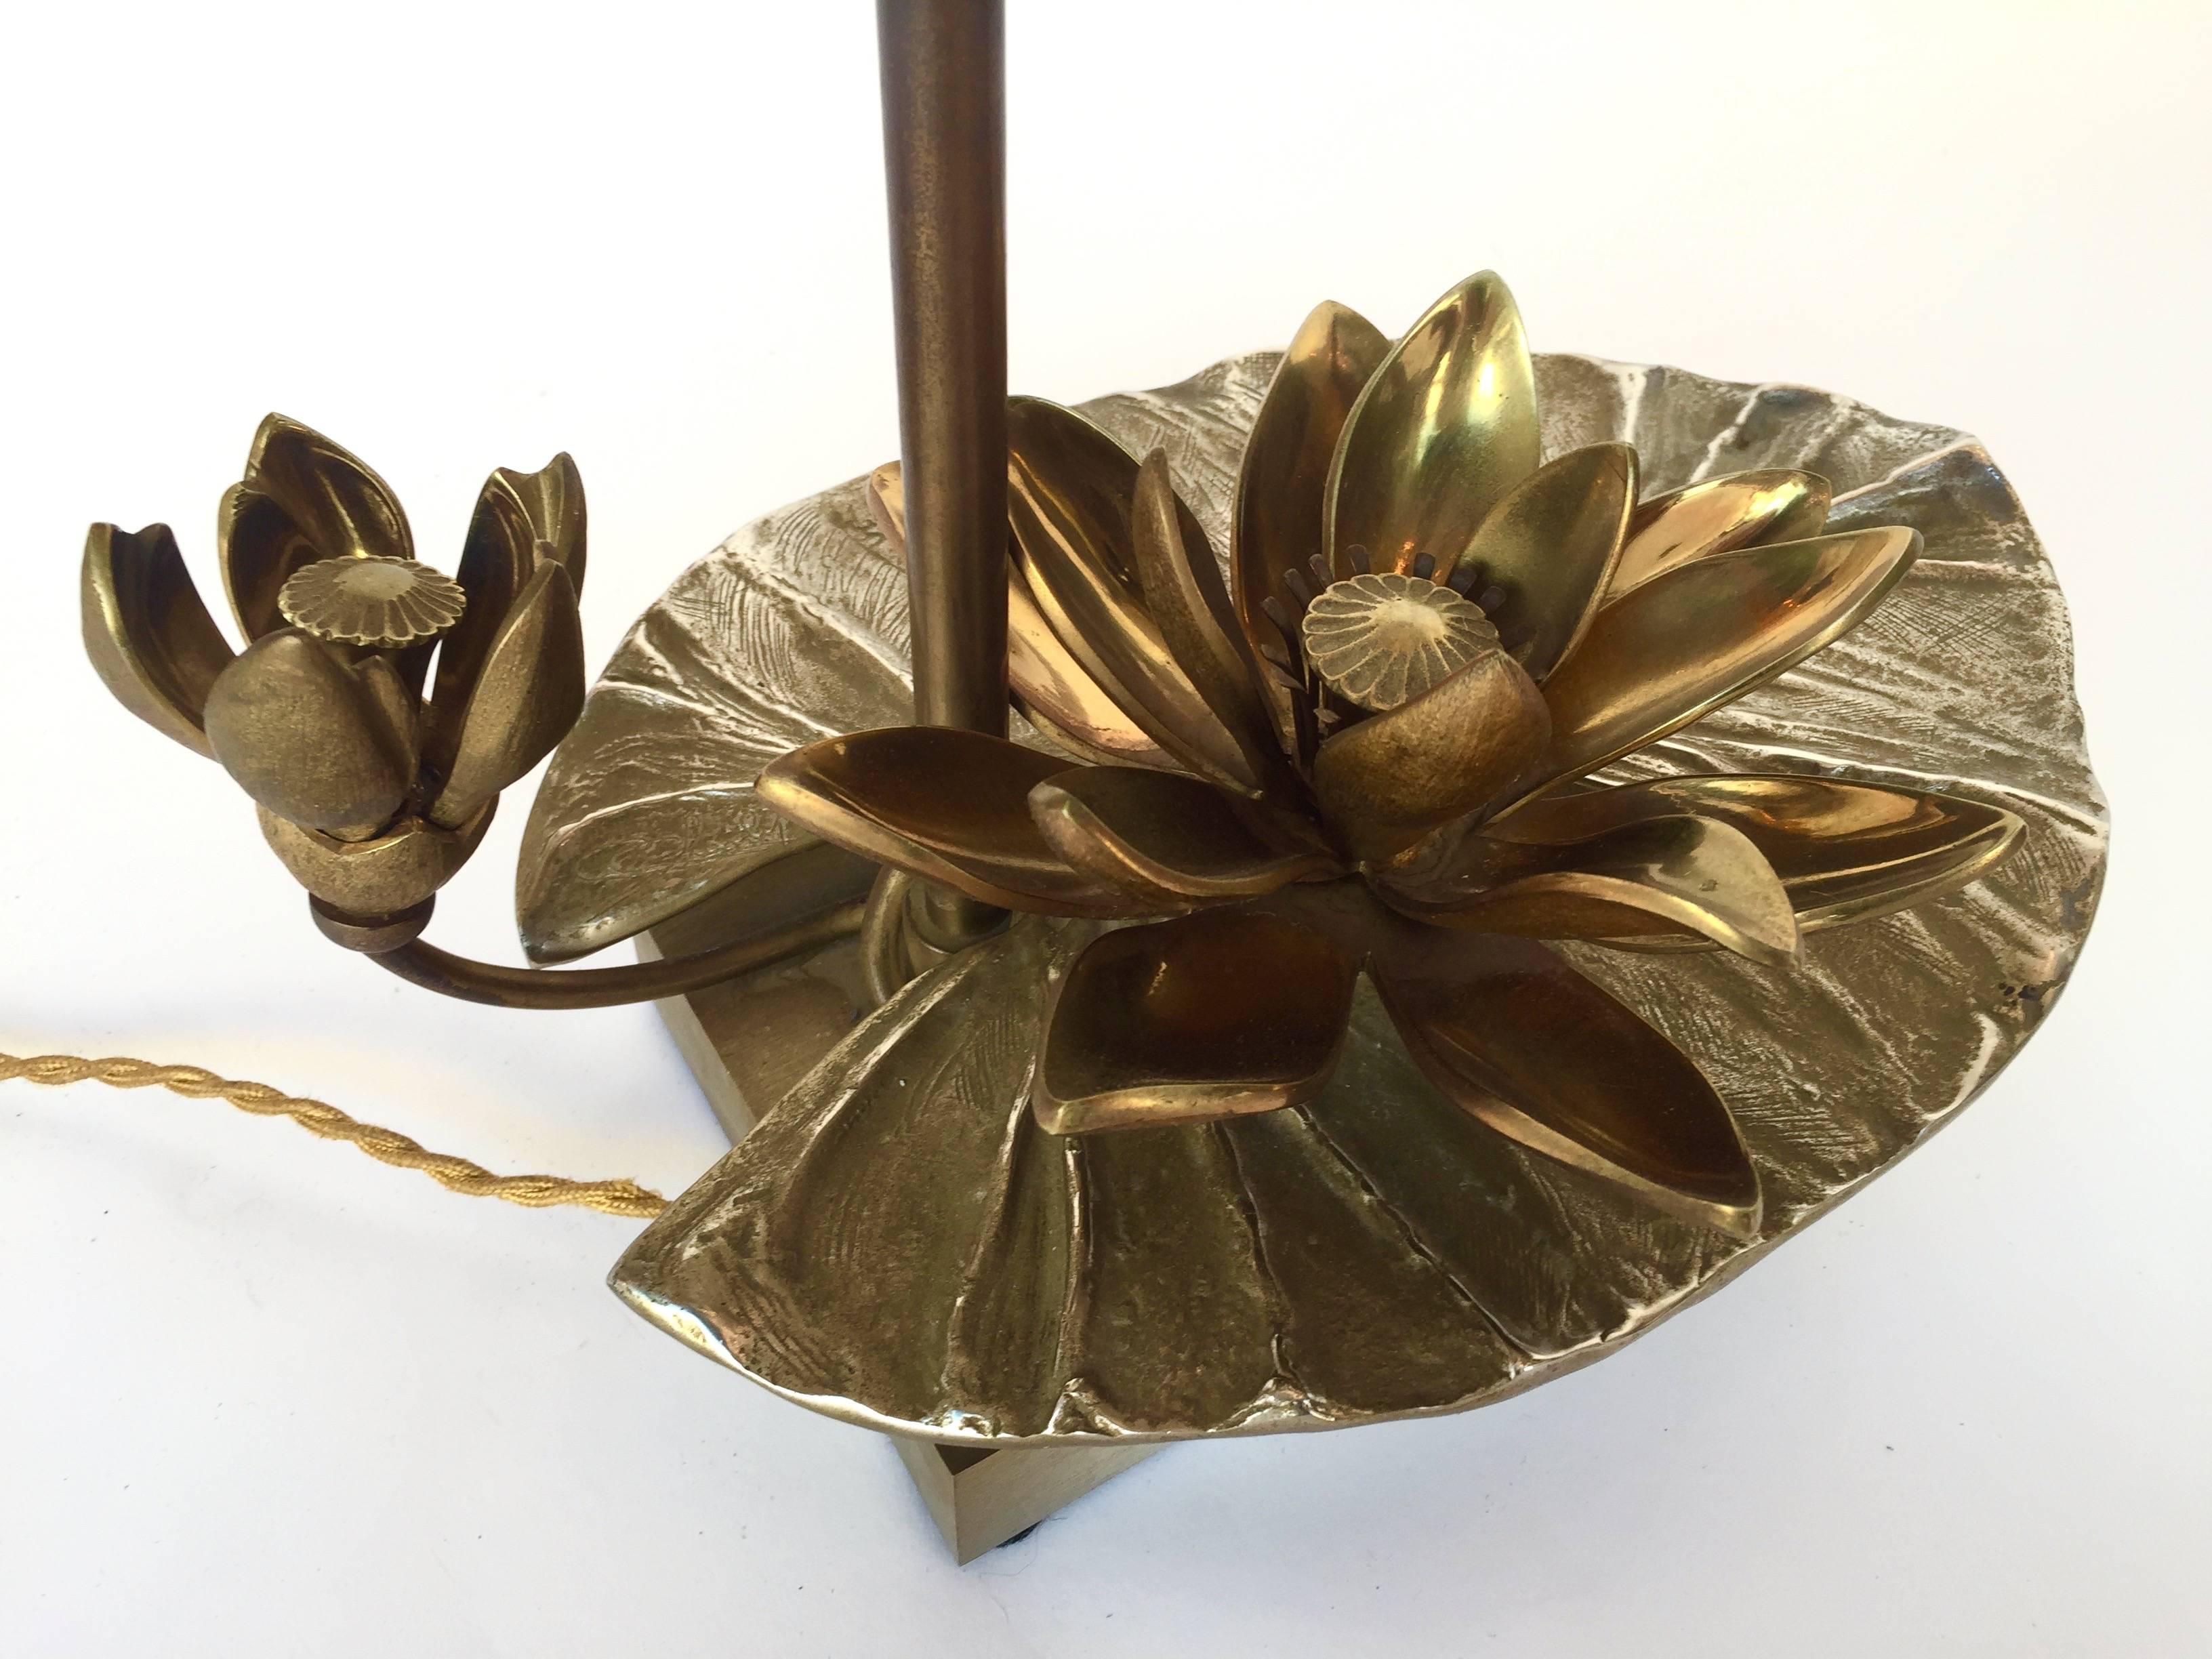 Rare pair of nenuphar or water lily pad lamps by Chrystiane Charles for Maison Charles. Real pair born together, there is a left and right lamp mounted in the opposite side. Iconic model from the 1970s. All in gilt bronze with the original